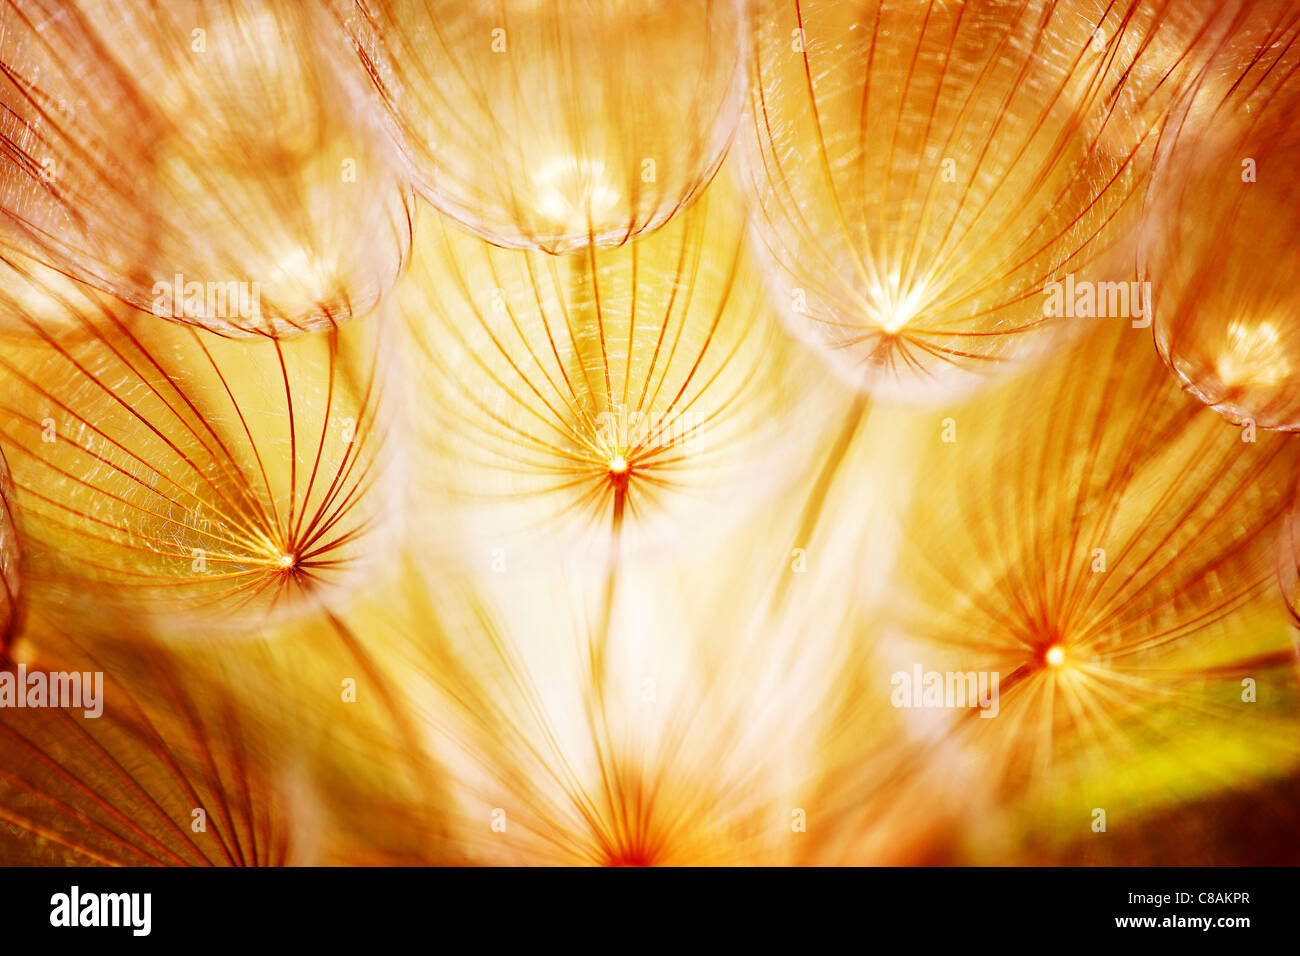 Soft dandelion flower, extreme closeup, abstract spring nature background Stock Photo